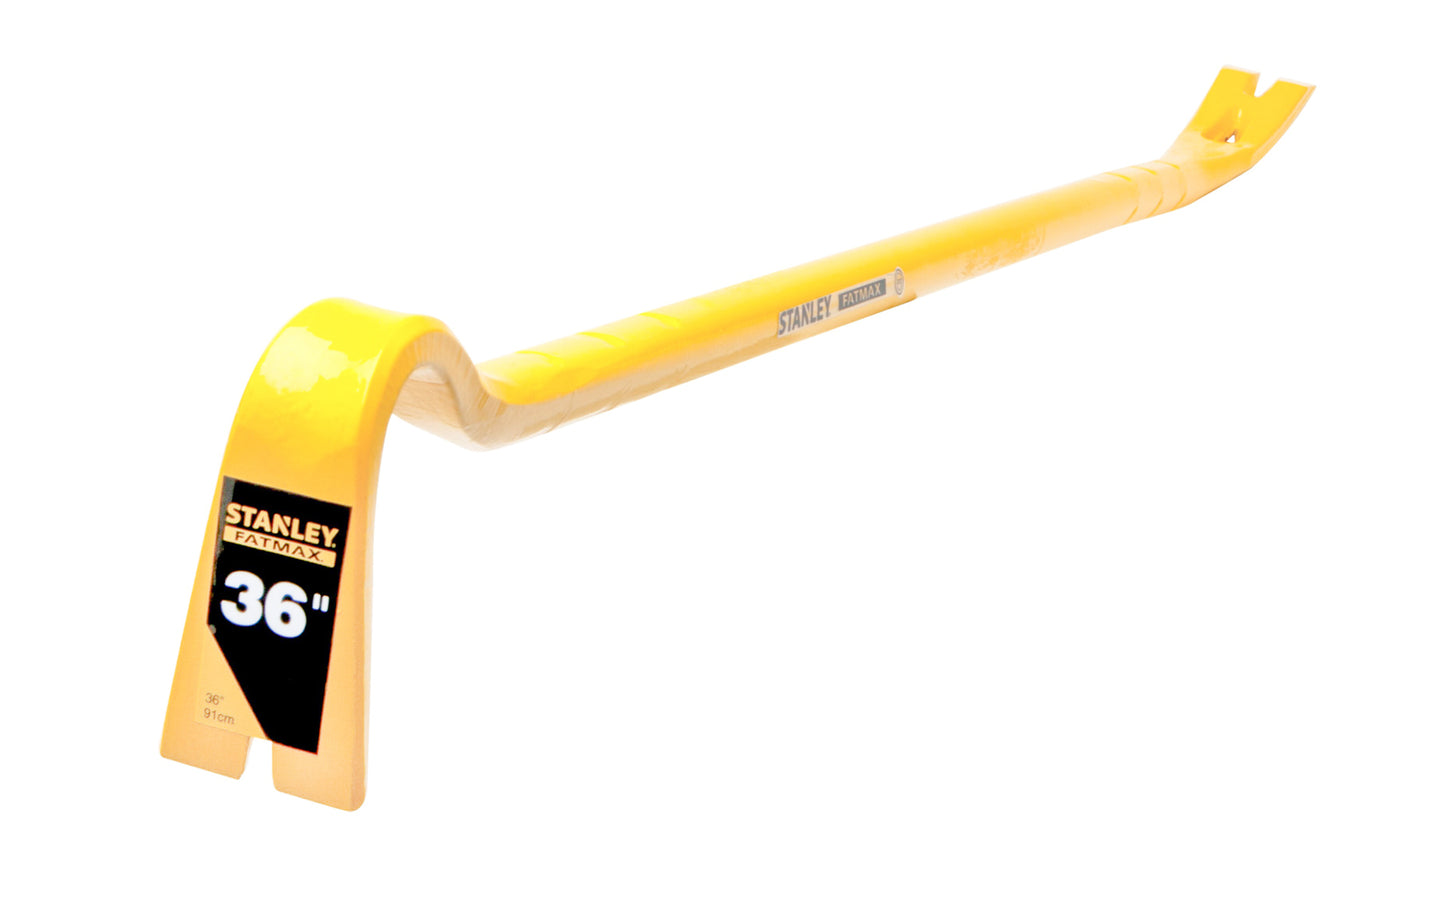 This Stanley Fatmax 36" wrecking bar is made of high carbon steel & is great for heavy demolition jobs. It has a tri-lobe design which provides a secure grip for ease of use as well as a slotted claw & beveled ends for functionality & performance. Model No. 55-104. High-visibility, powder-coated finish. 